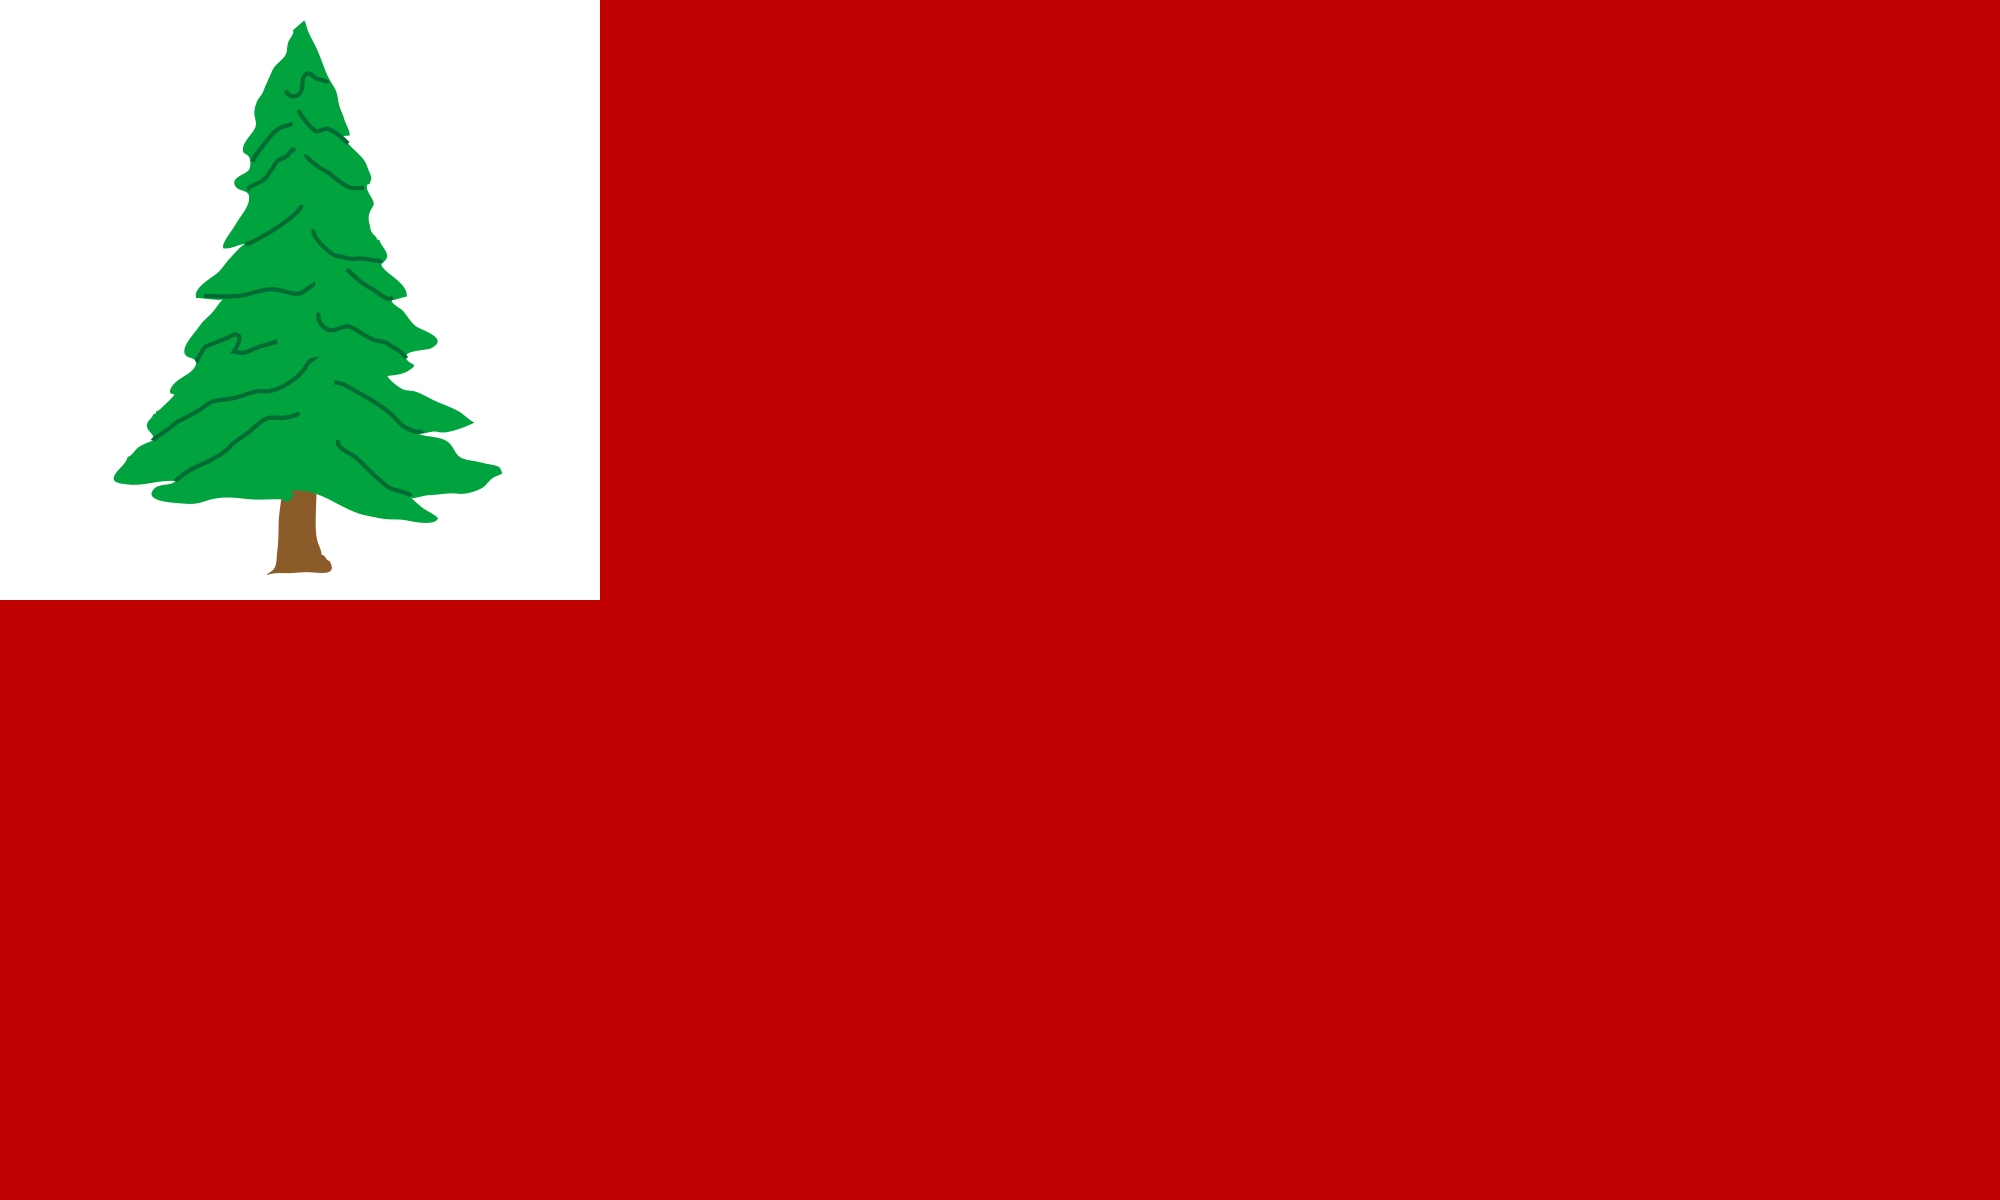 2000px-New_England_pine_flag.svg.png